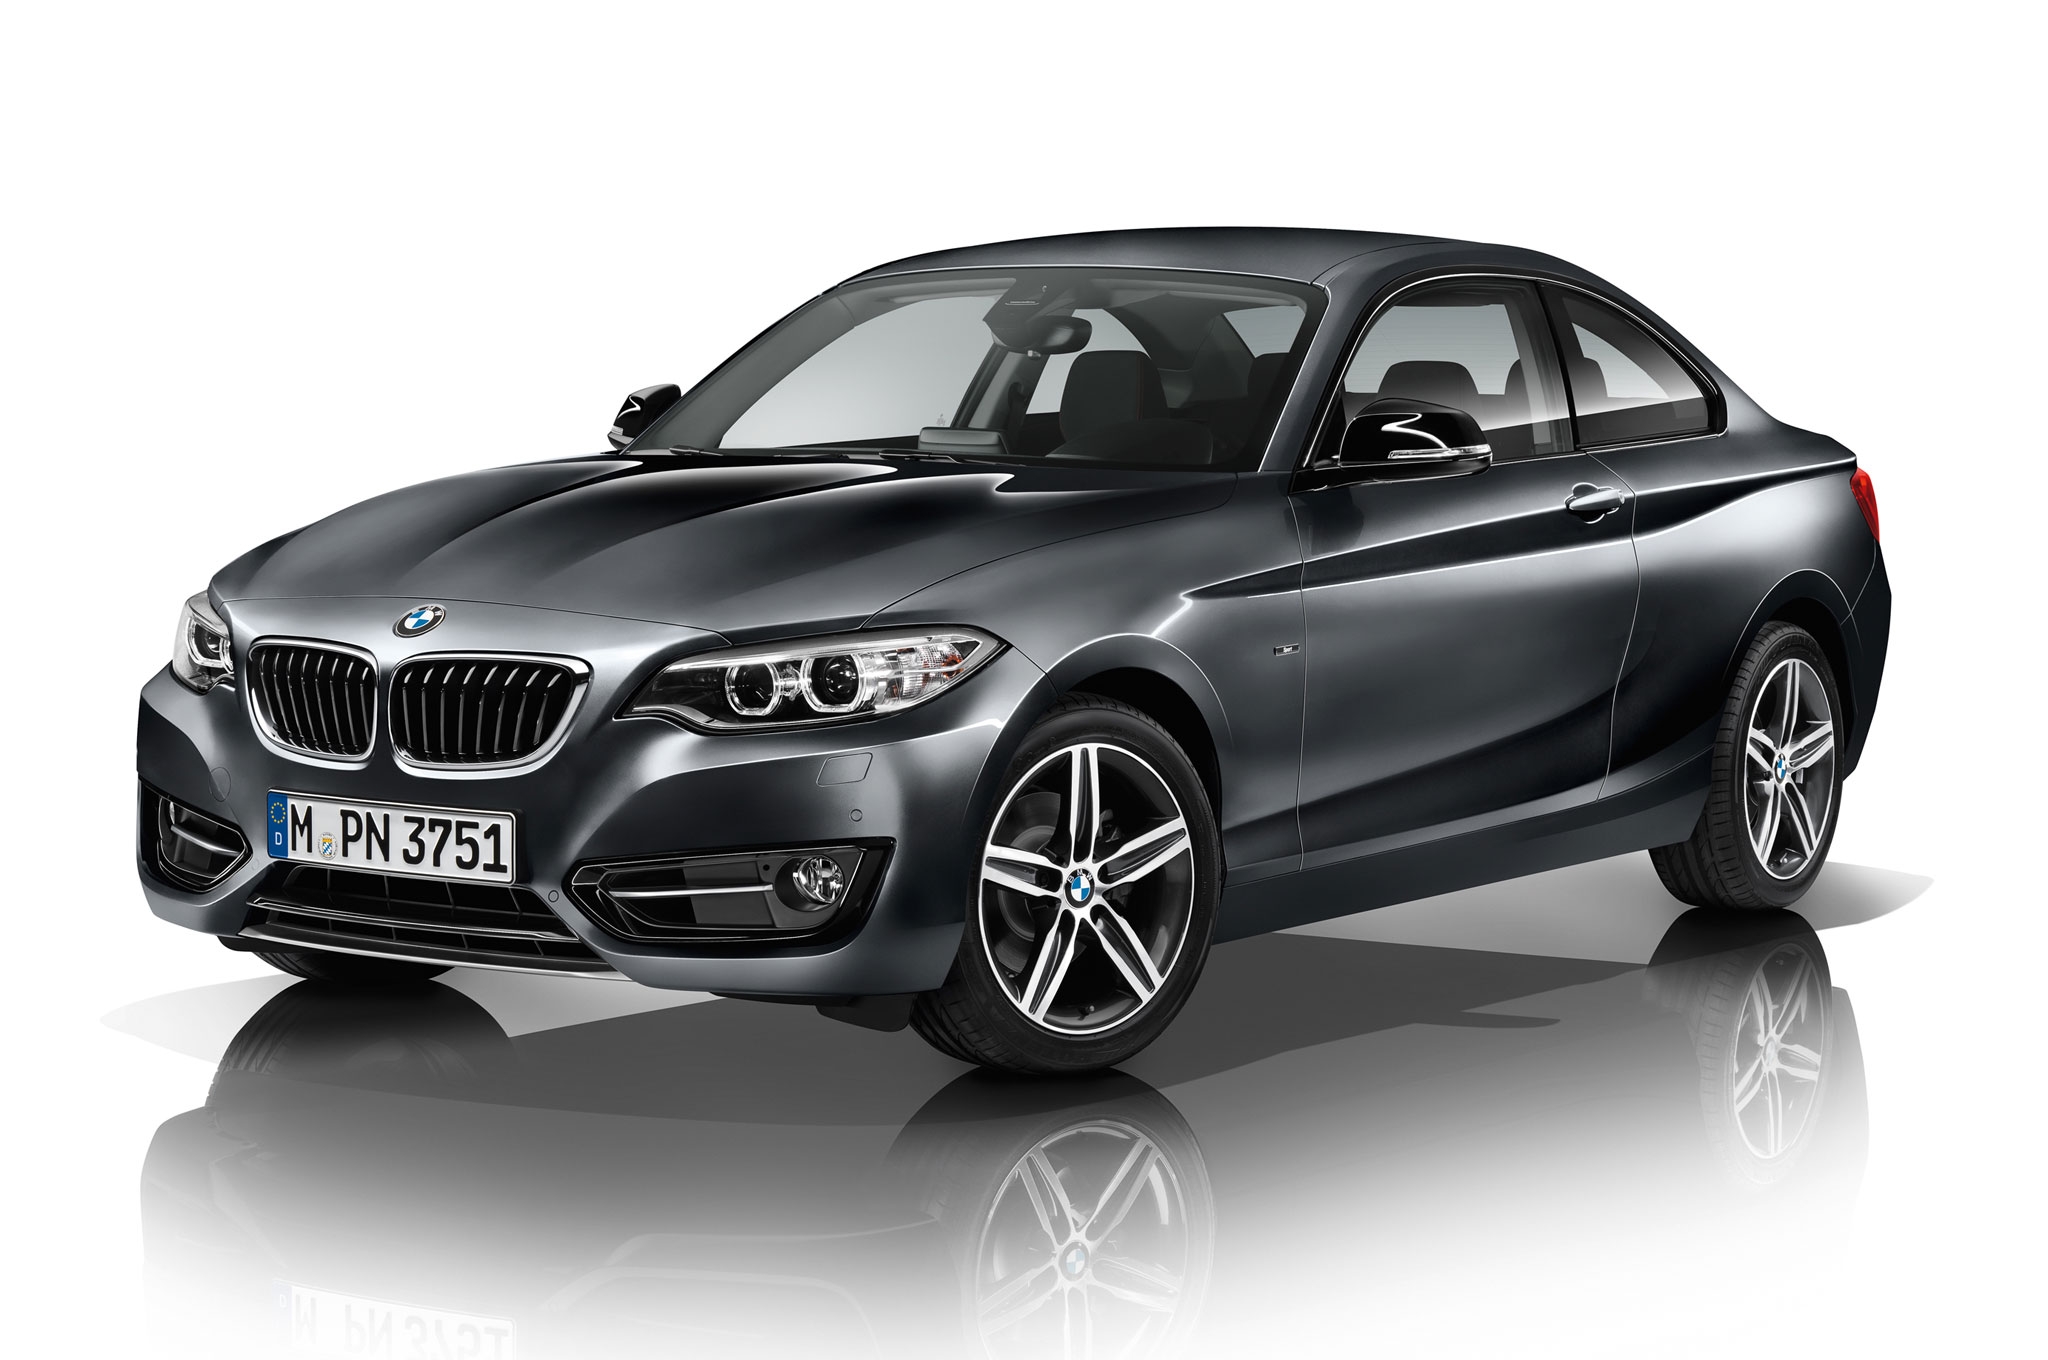 2014 BMW 2 Series Coupe Backgrounds, Compatible - PC, Mobile, Gadgets| 2048x1360 px